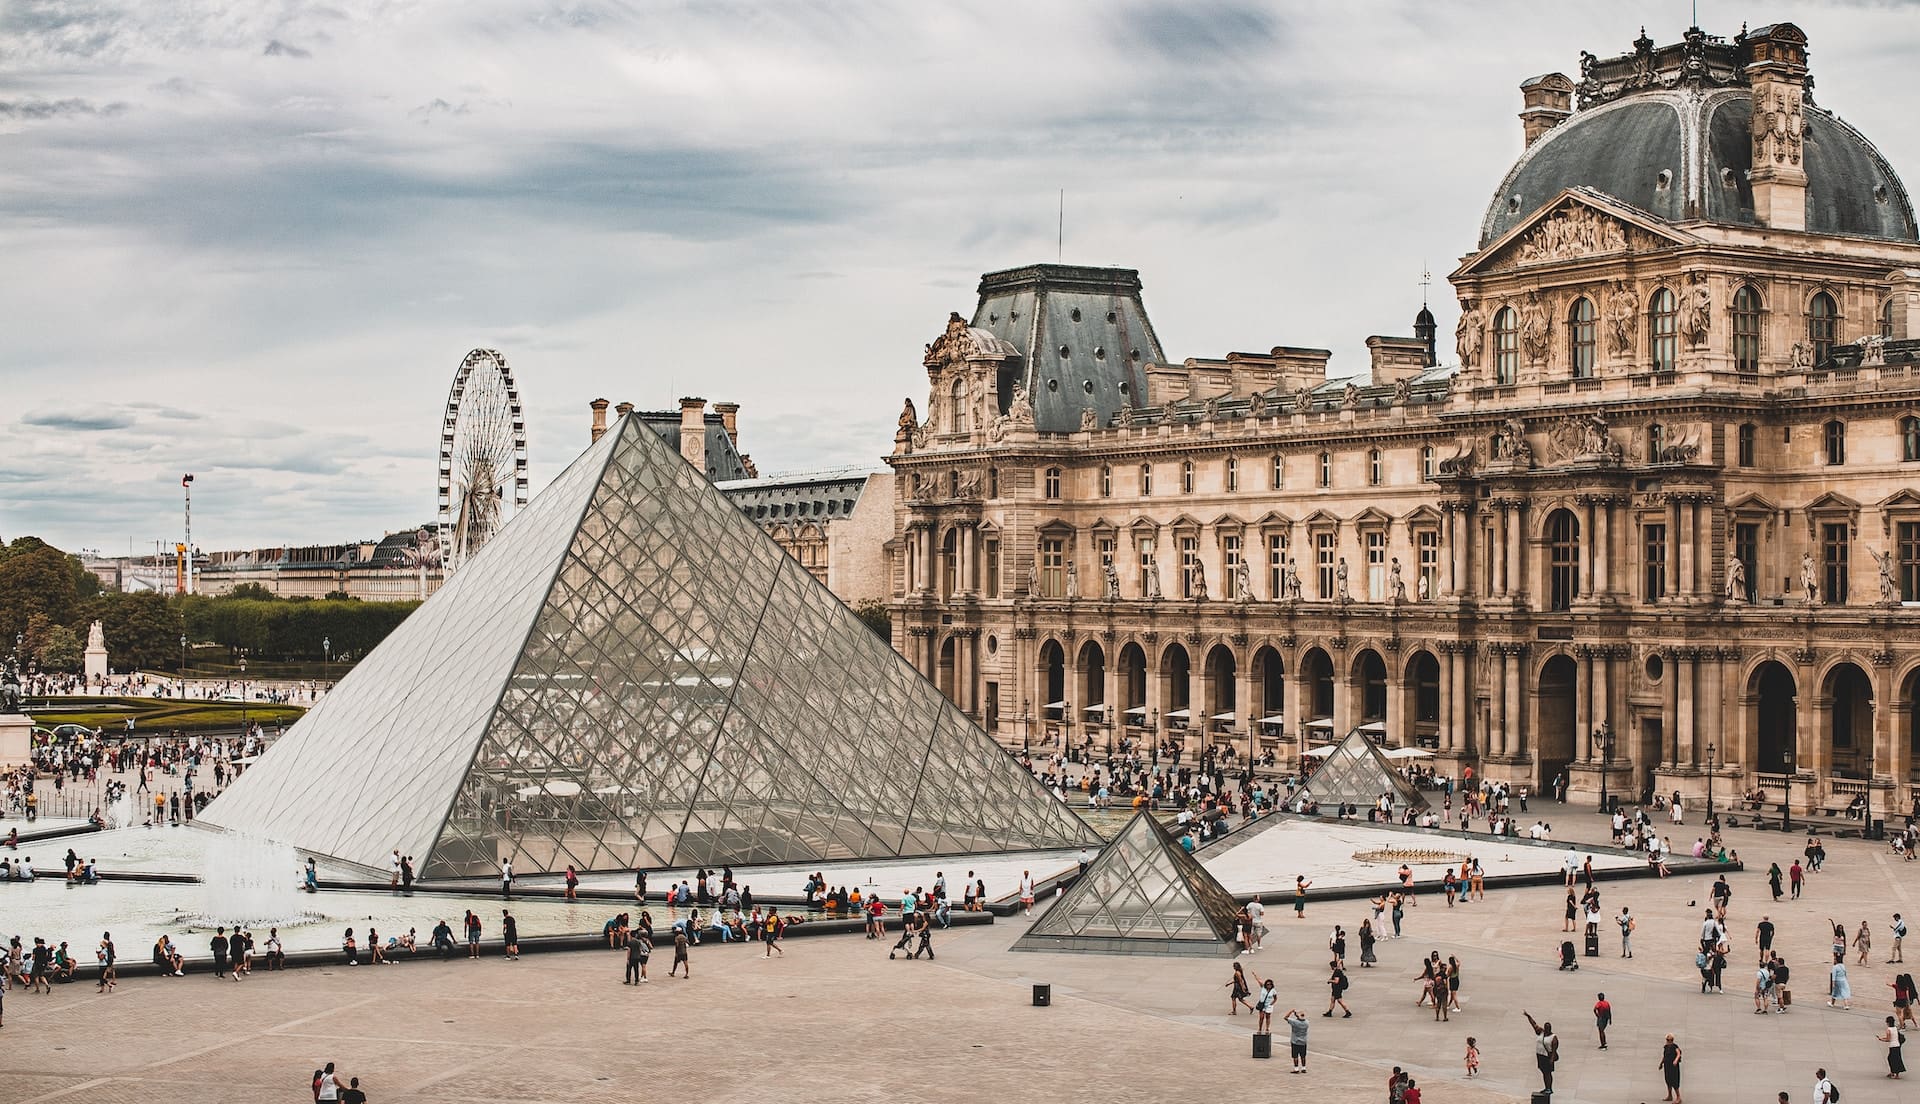 The Louvre's glass pyramid (photo: Mika Baumeister, Unsplash)